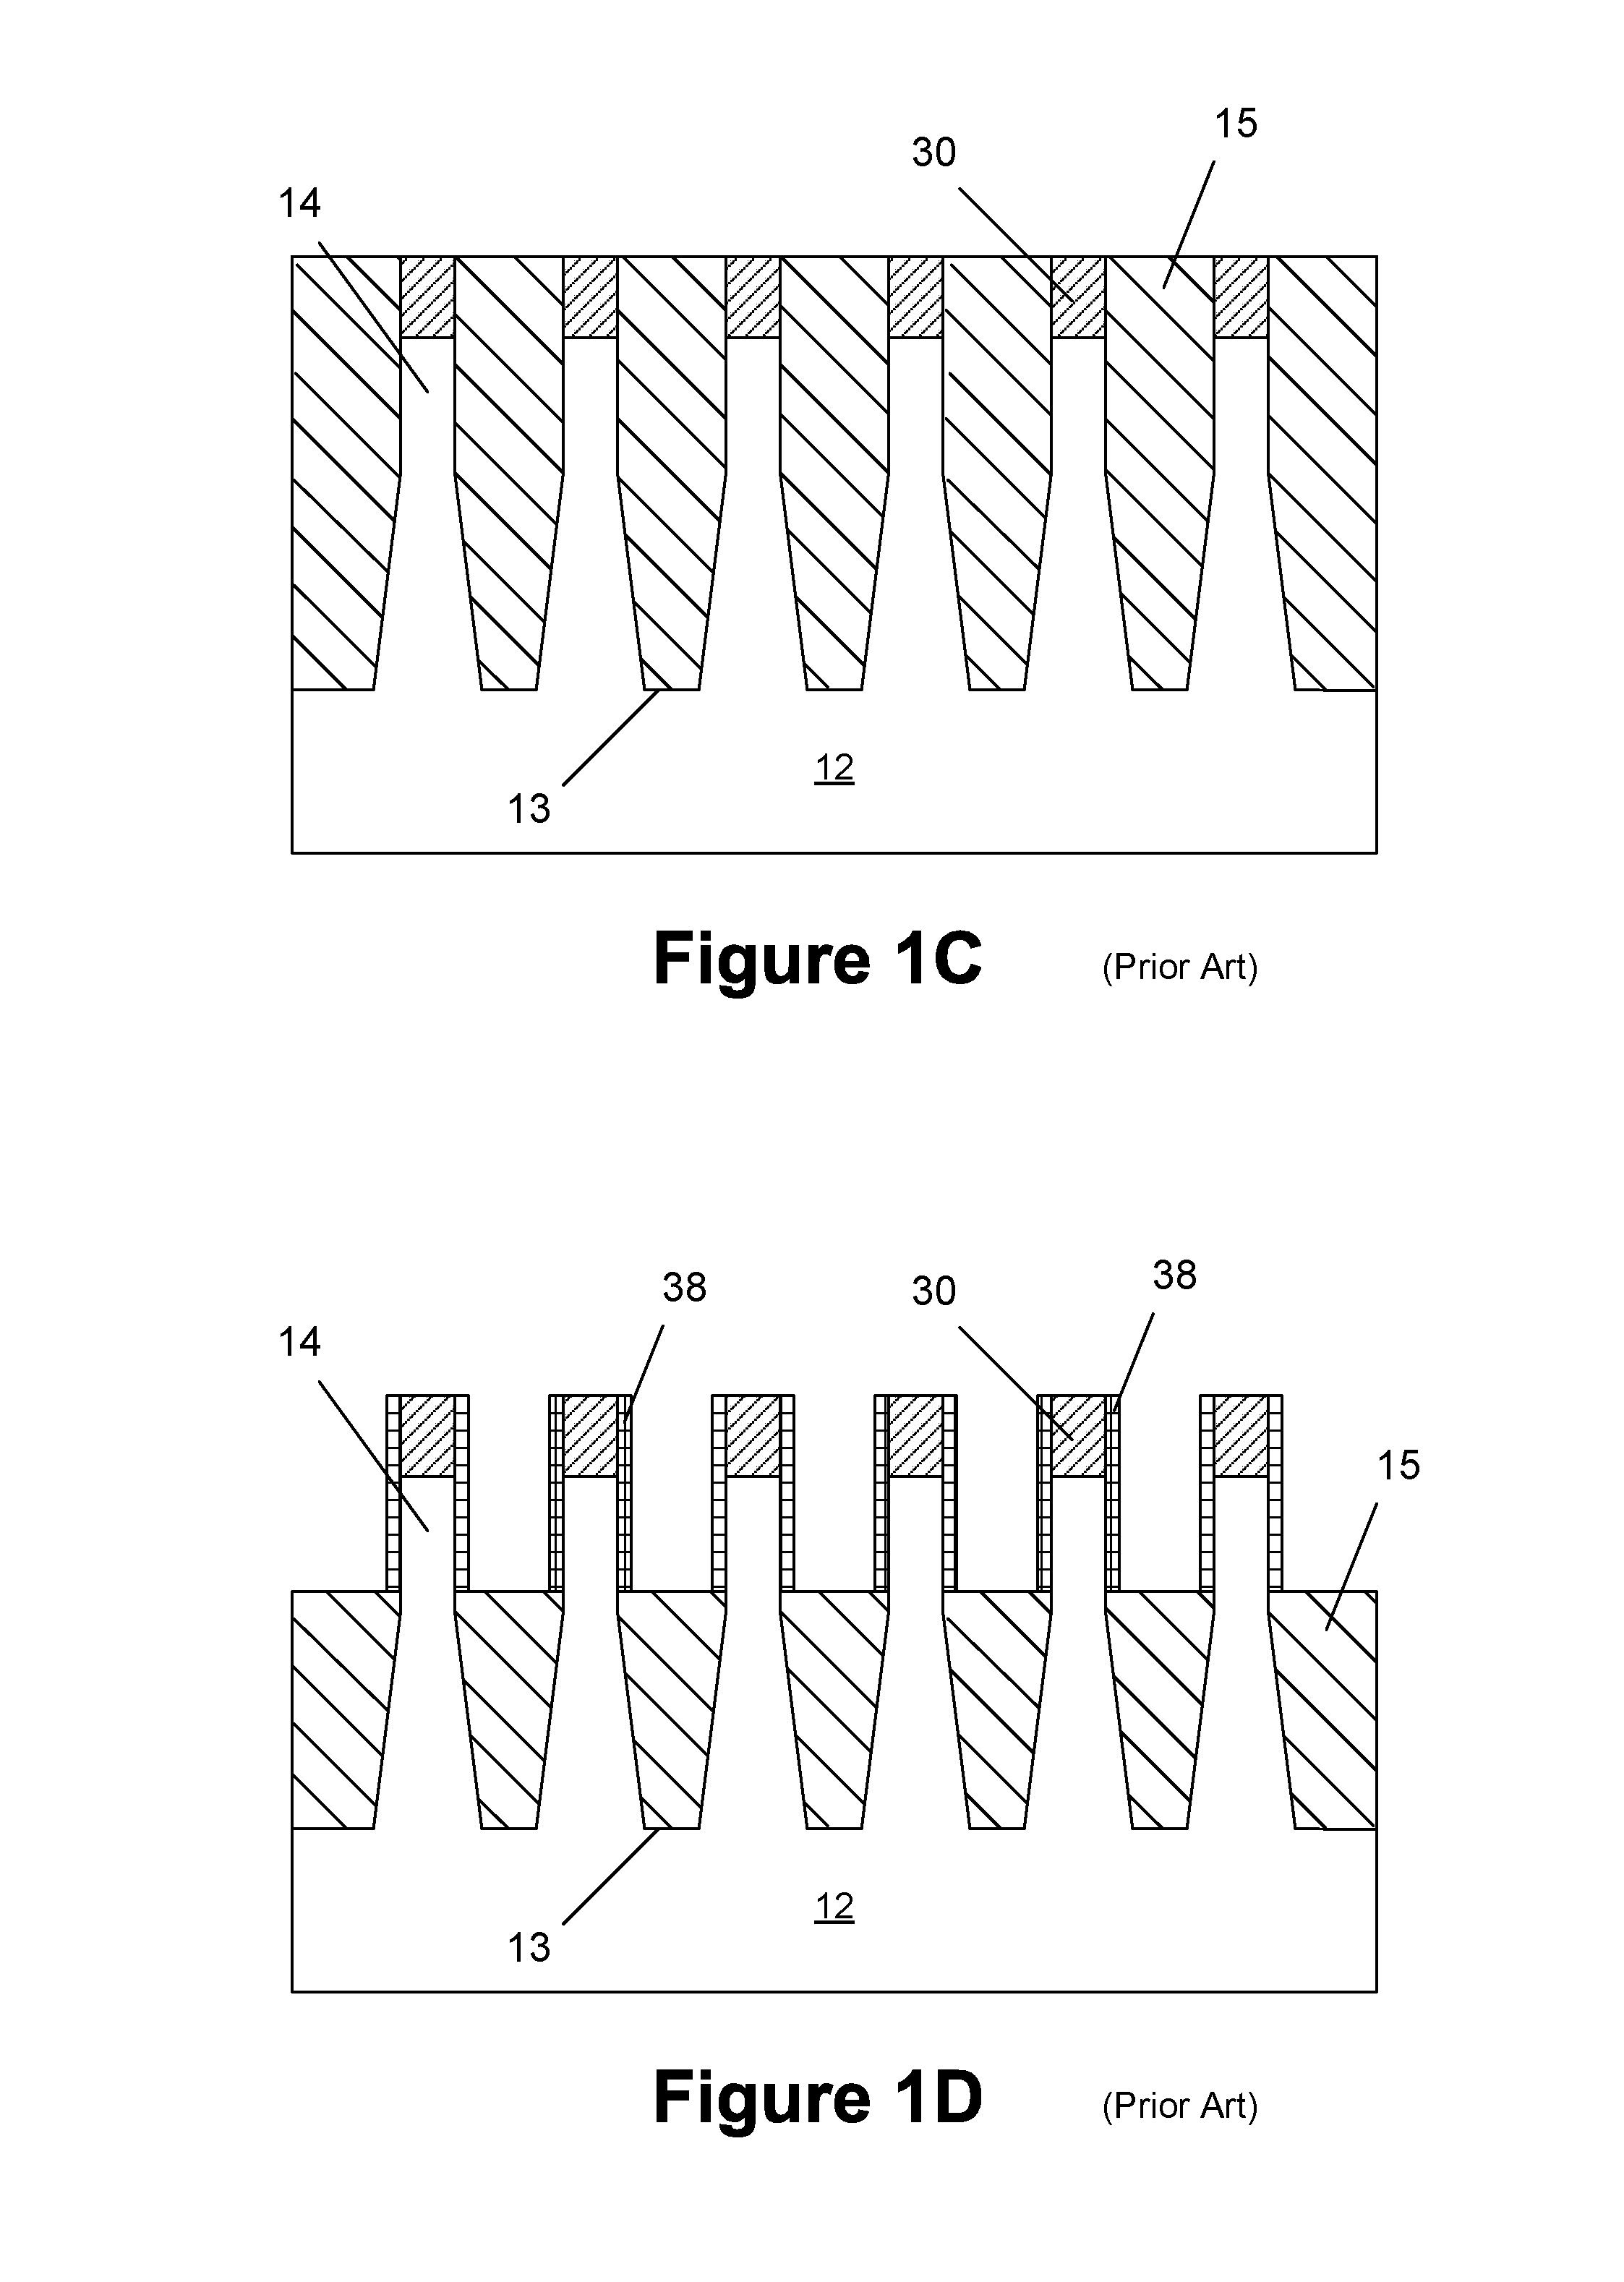 Methods of forming fin isolation regions on finfet semiconductor devices using an oxidation-blocking layer of material and by performing a fin-trimming process